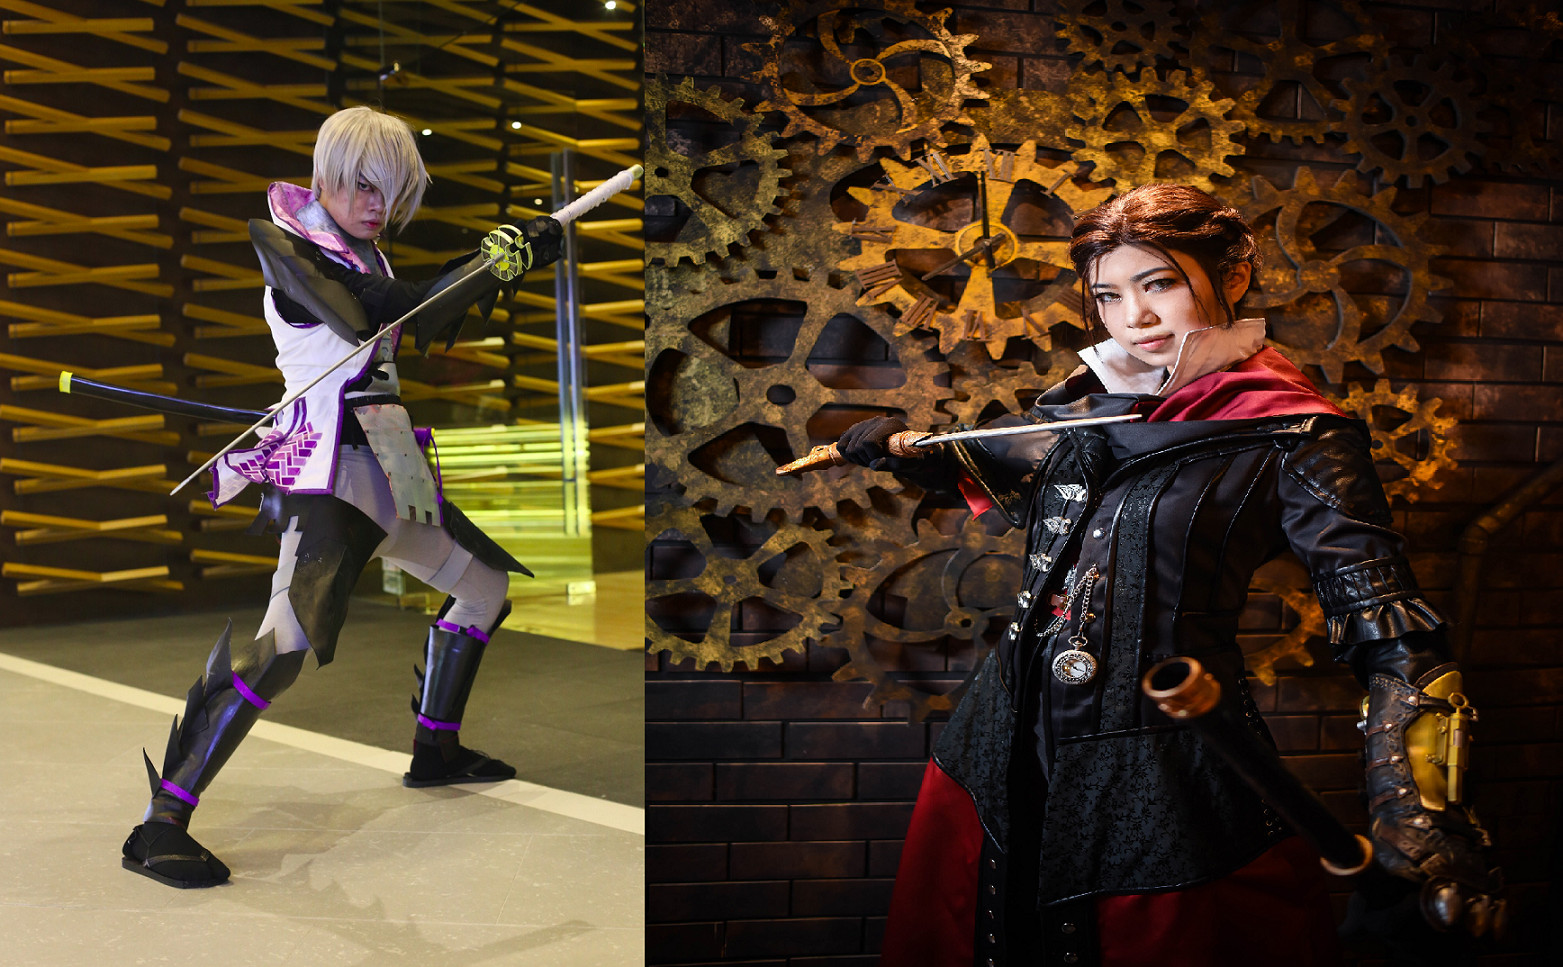 Cosplay and gaming – a symbiotic relationship